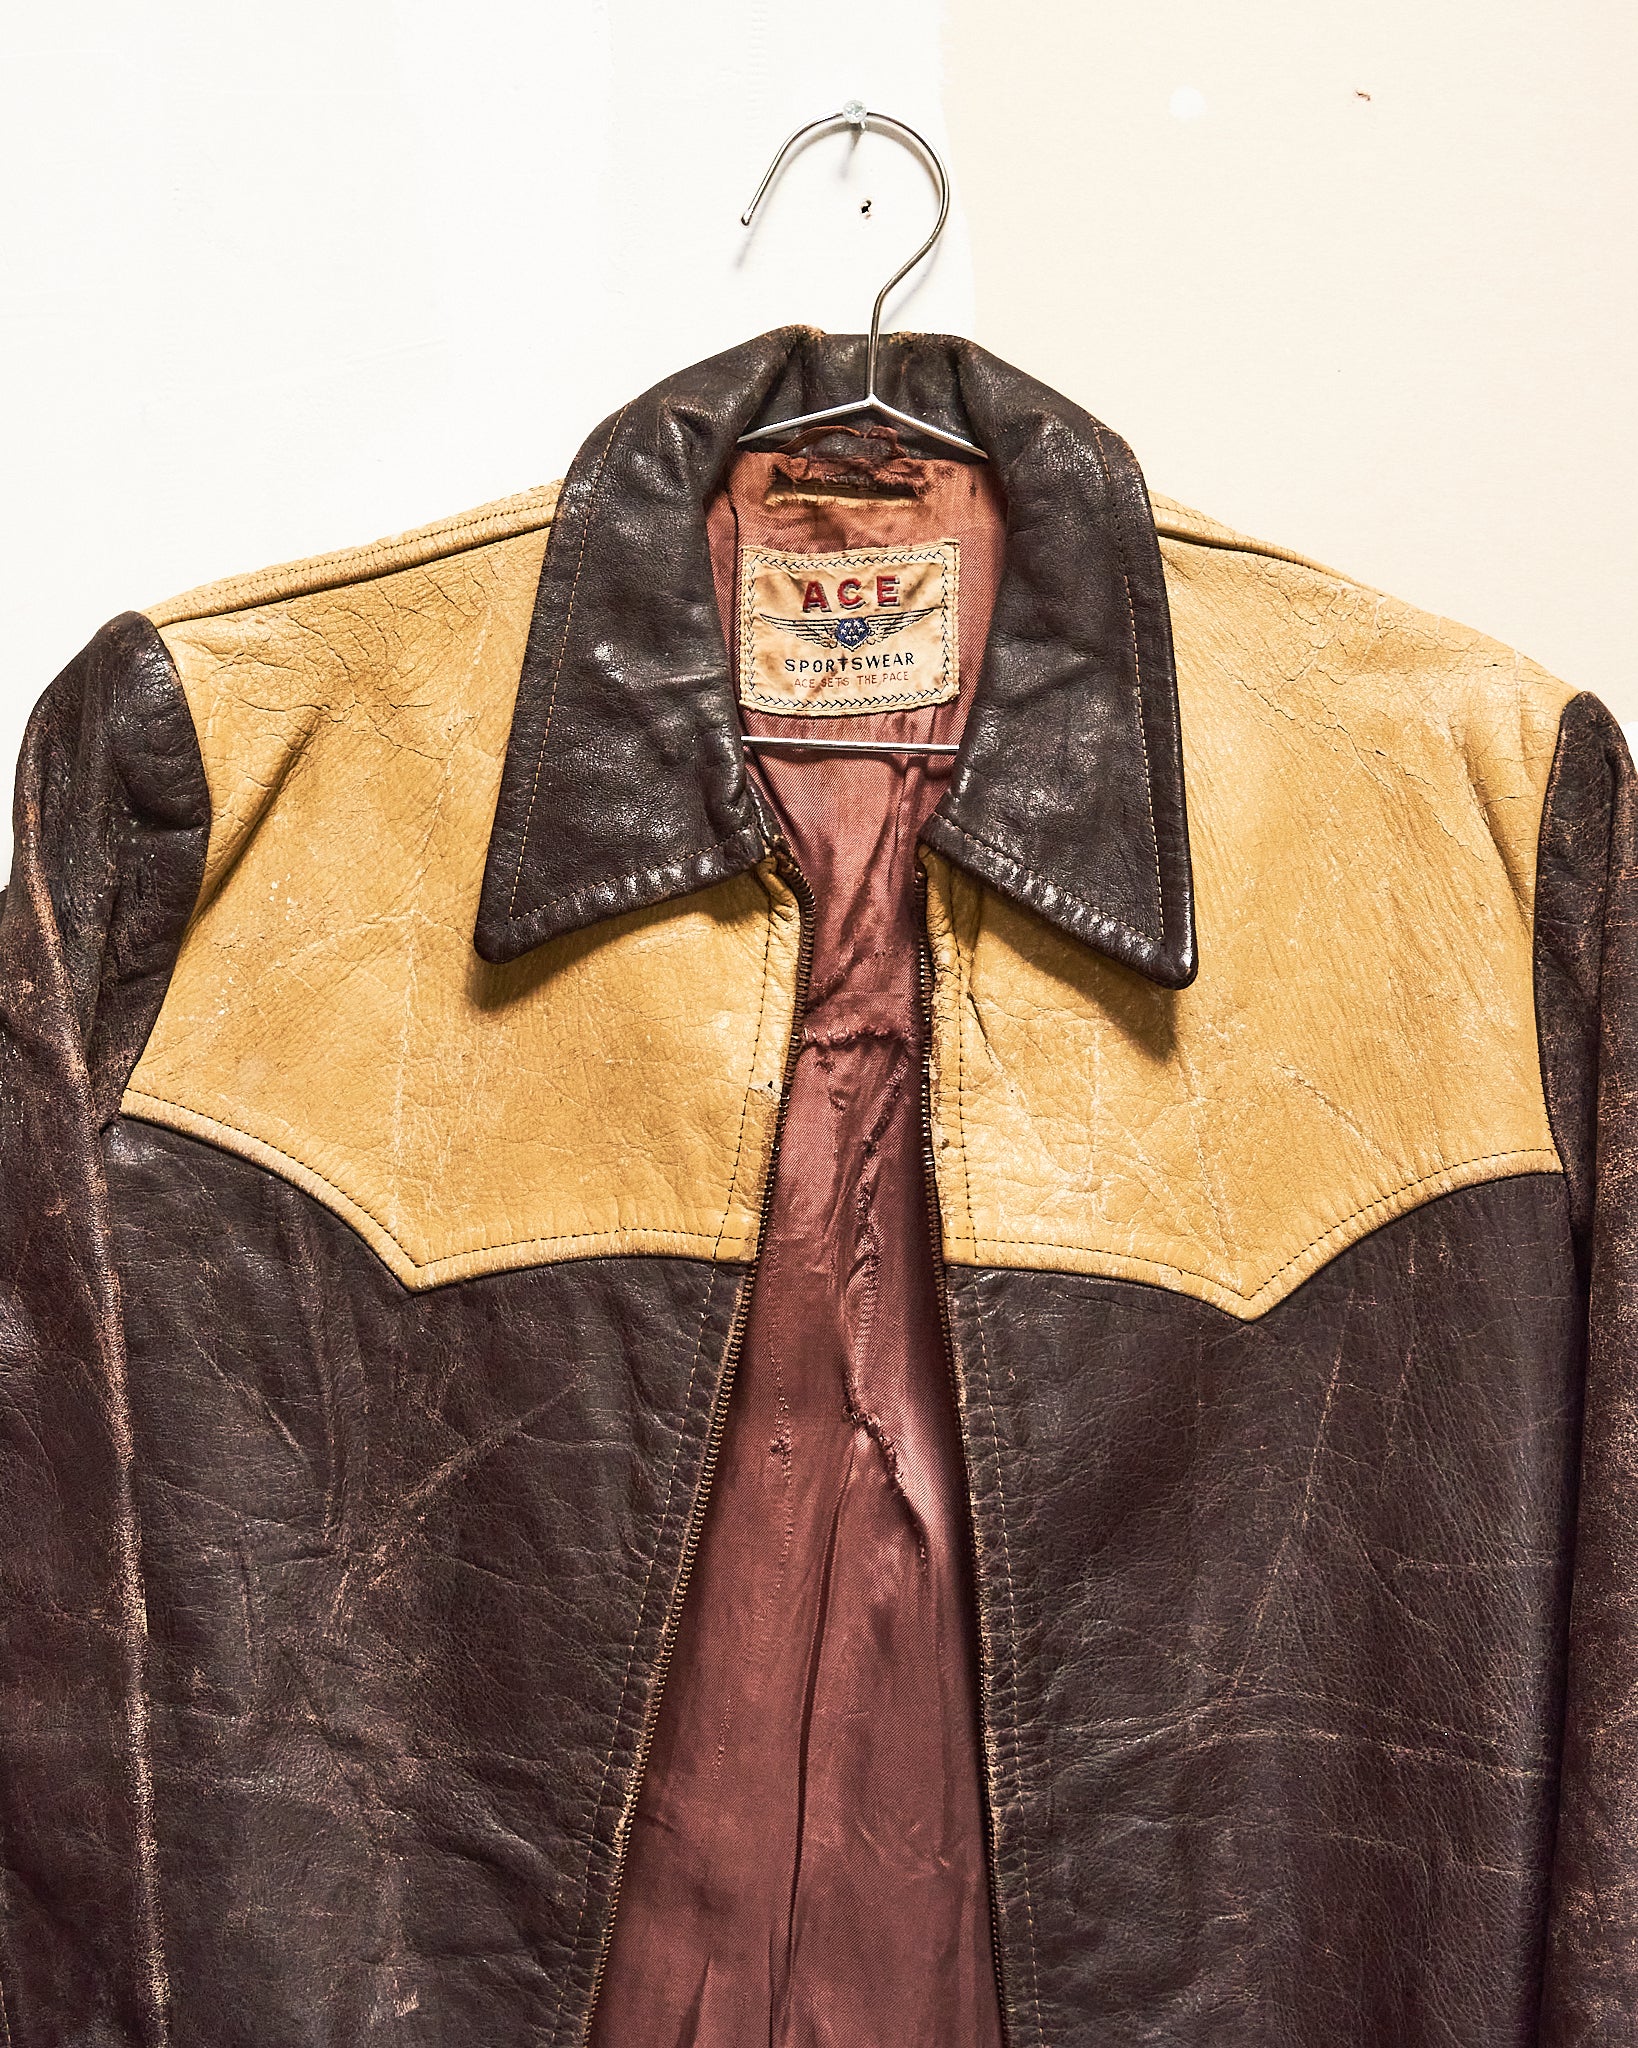 1950s/1960s Ace Sportswear Leather Jacket – Coffee and Clothing